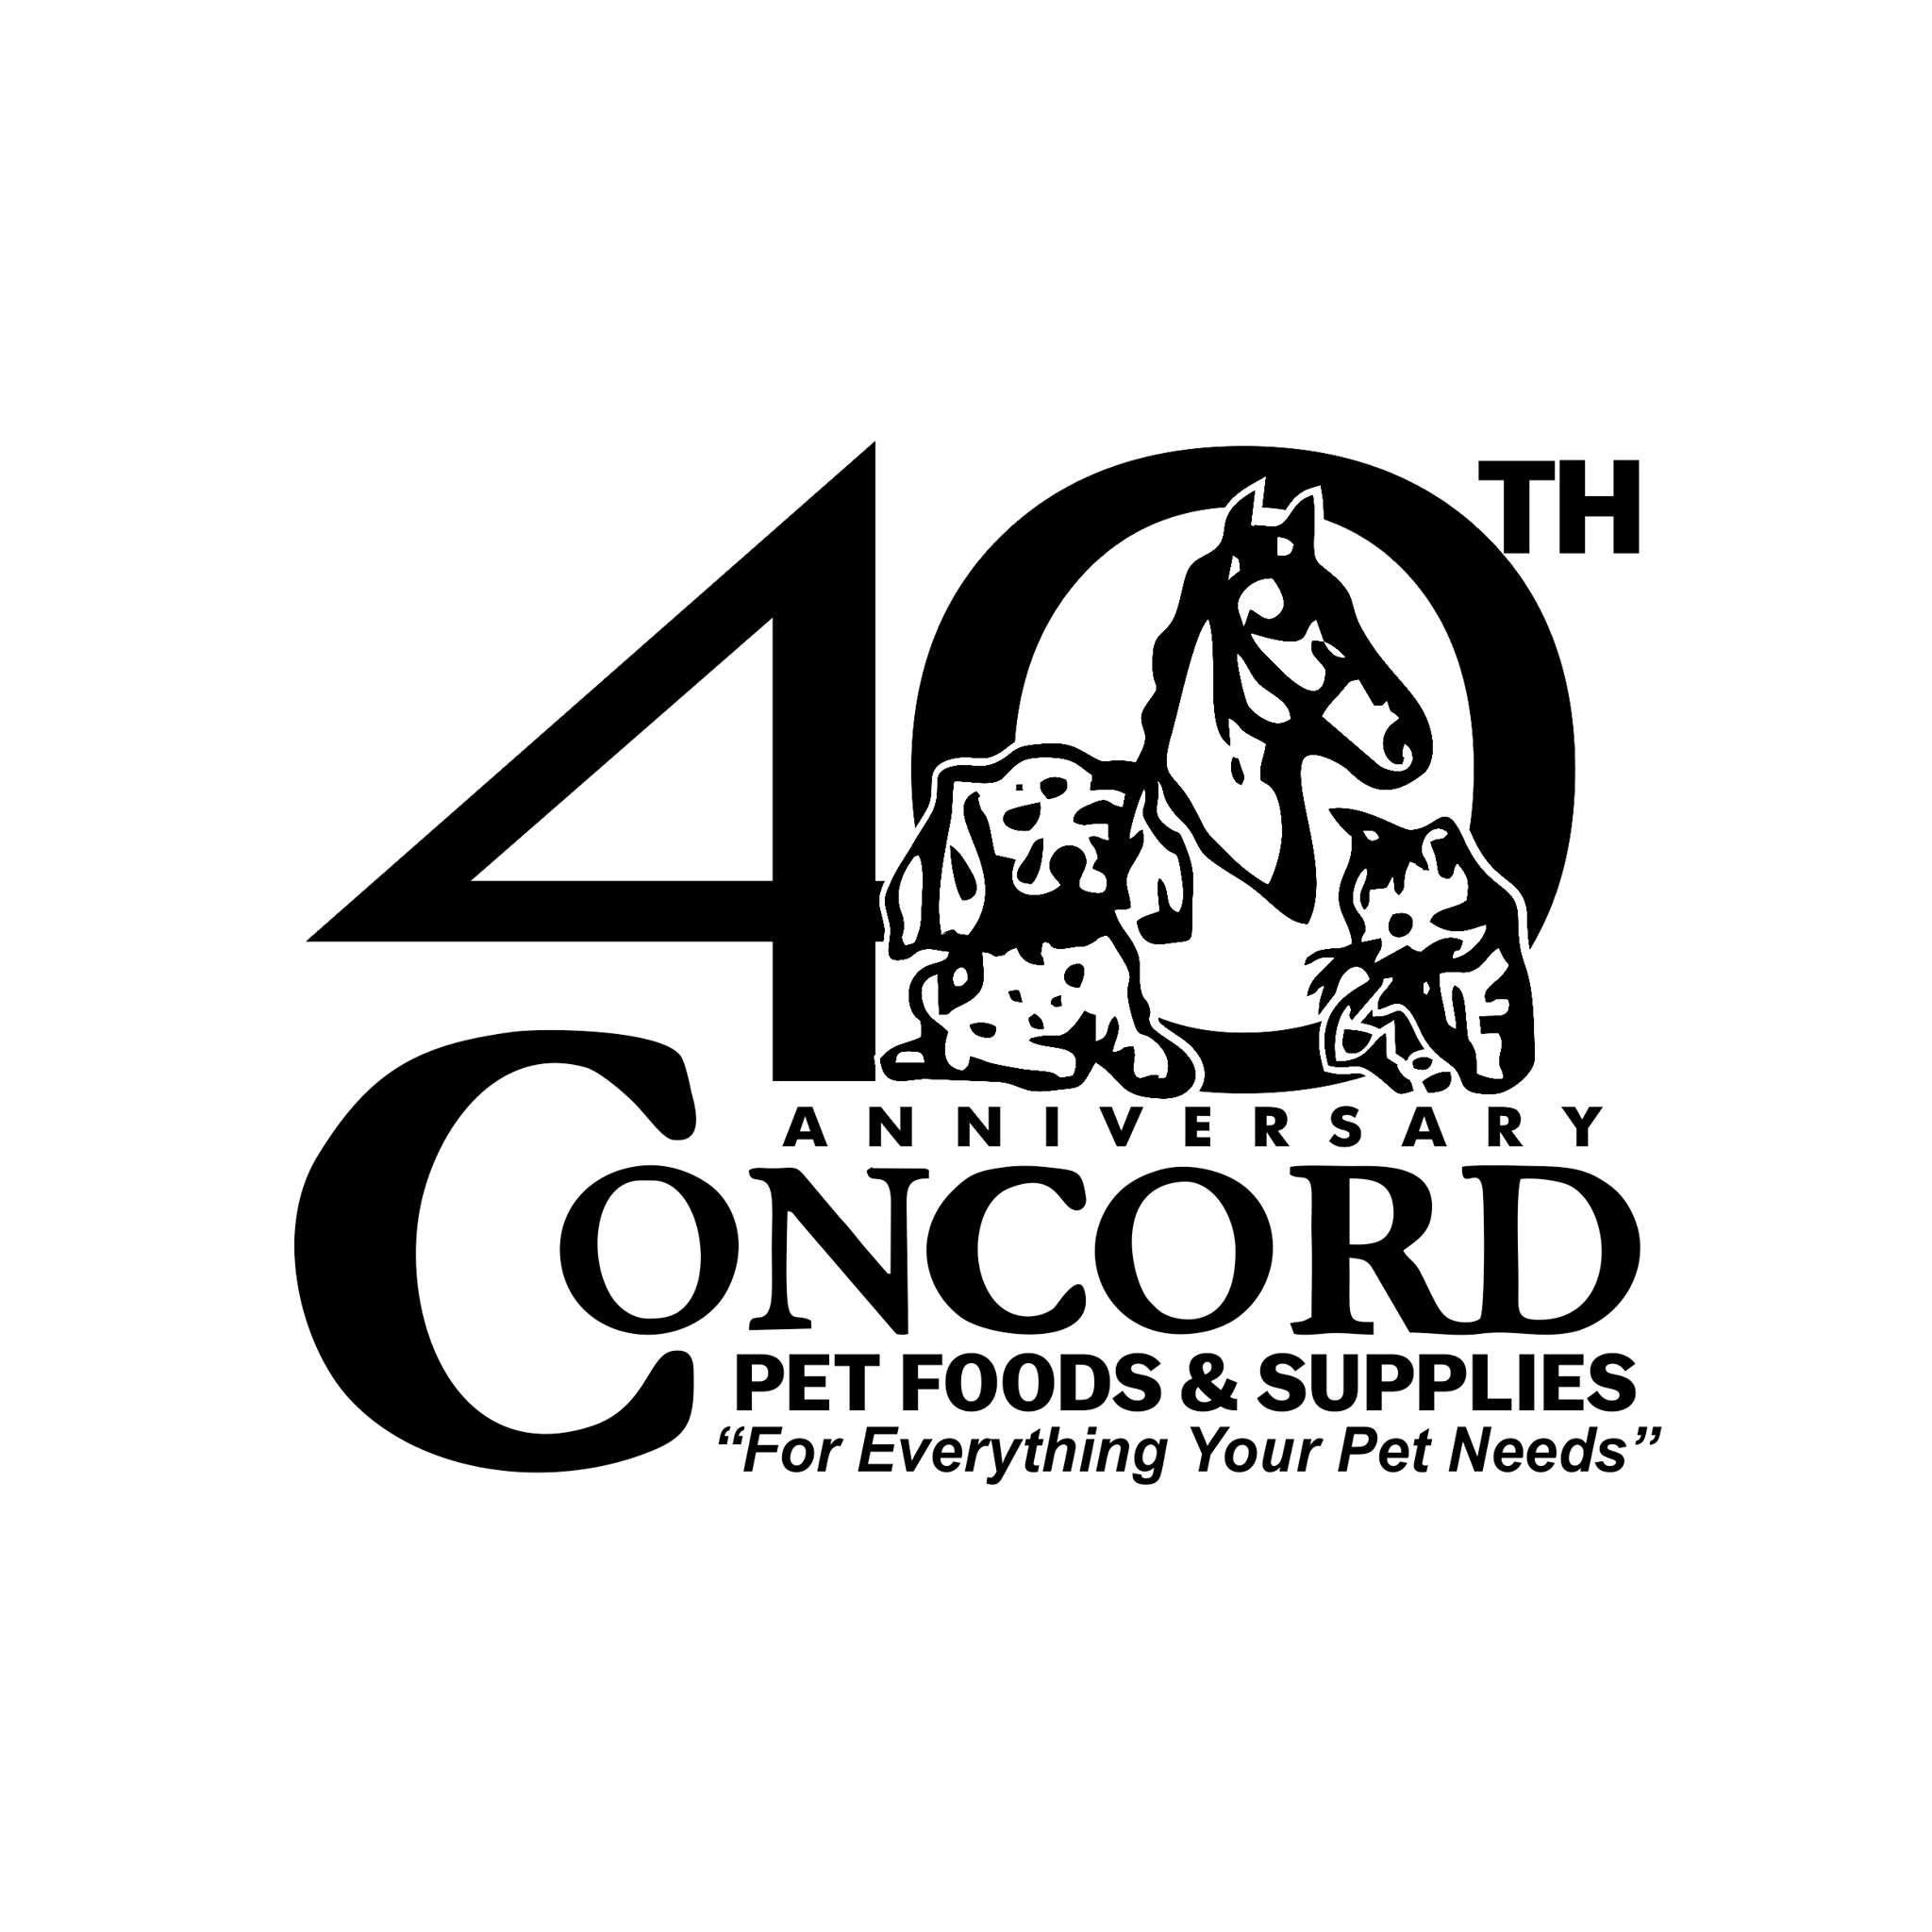 Company logo of Concord Pet Foods & Supplies